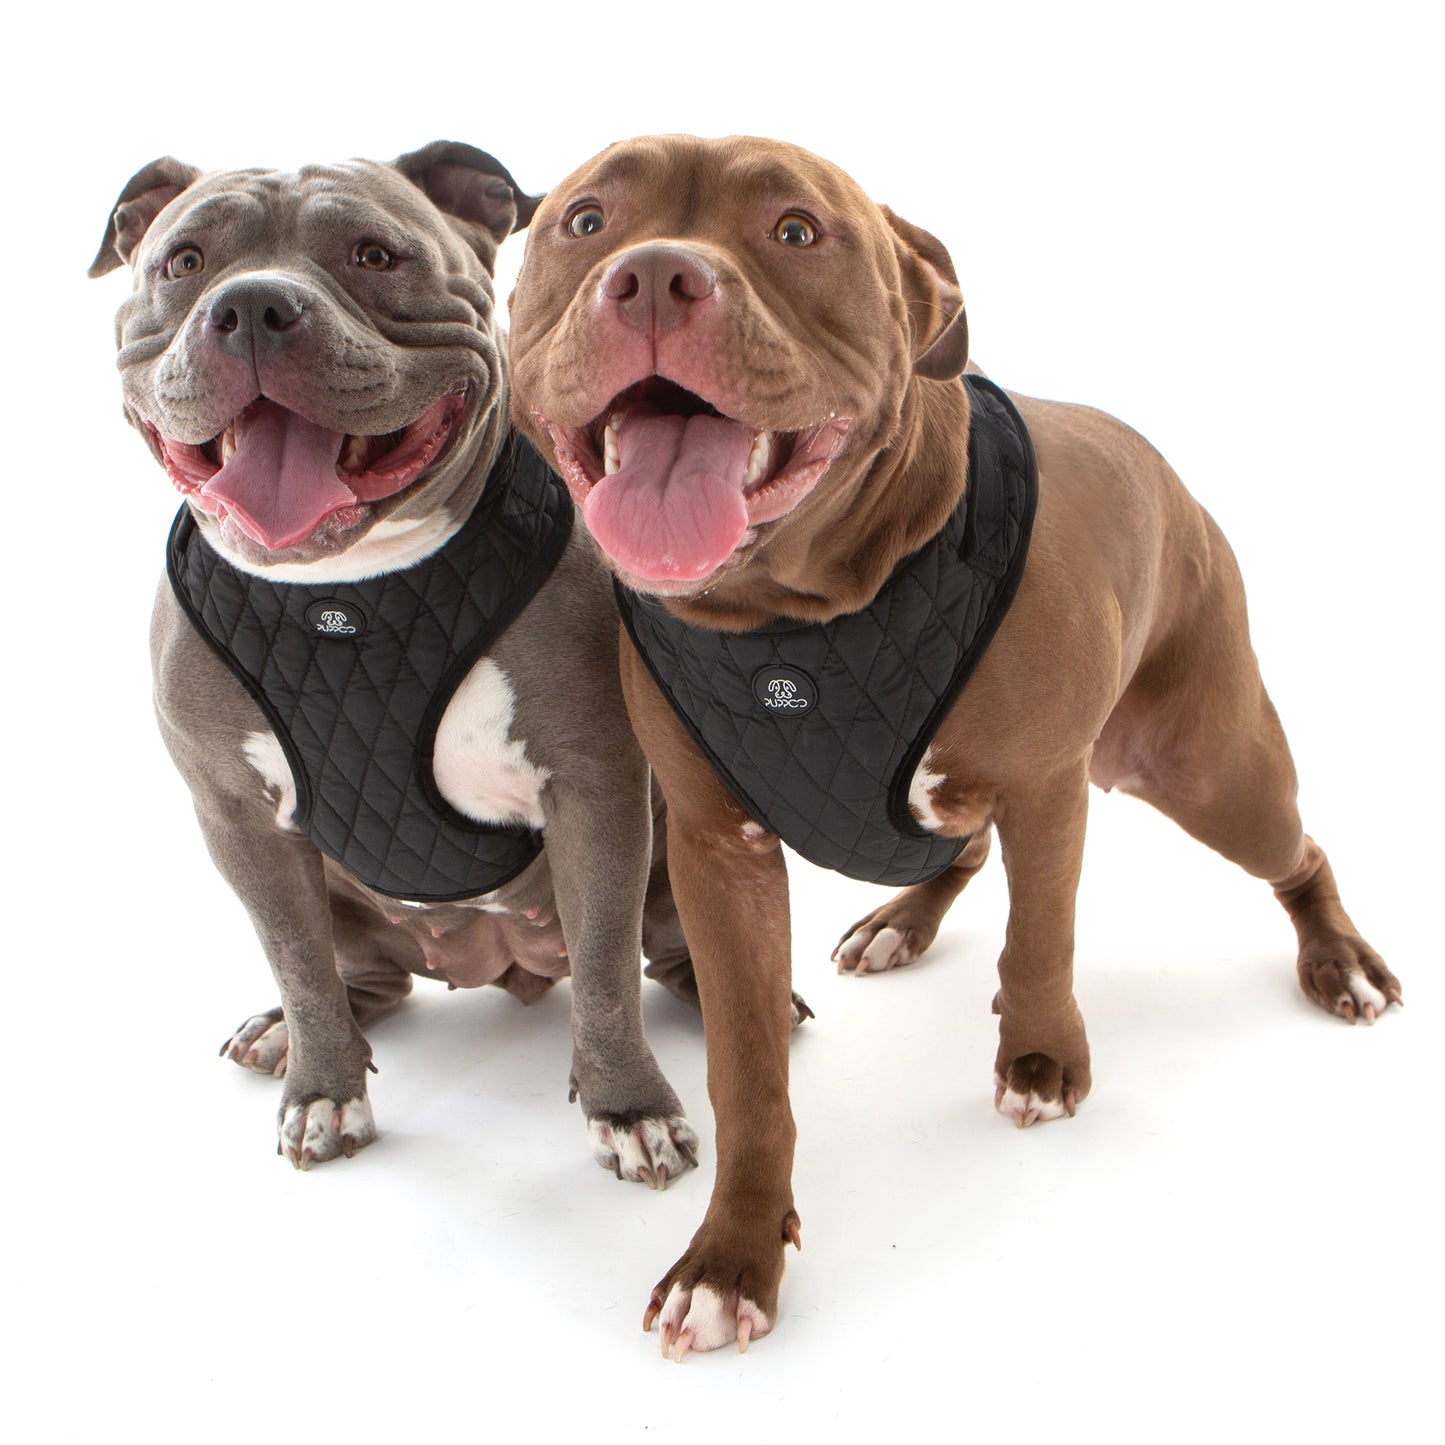 Puffer Vest Dog Harness on two American Bullies